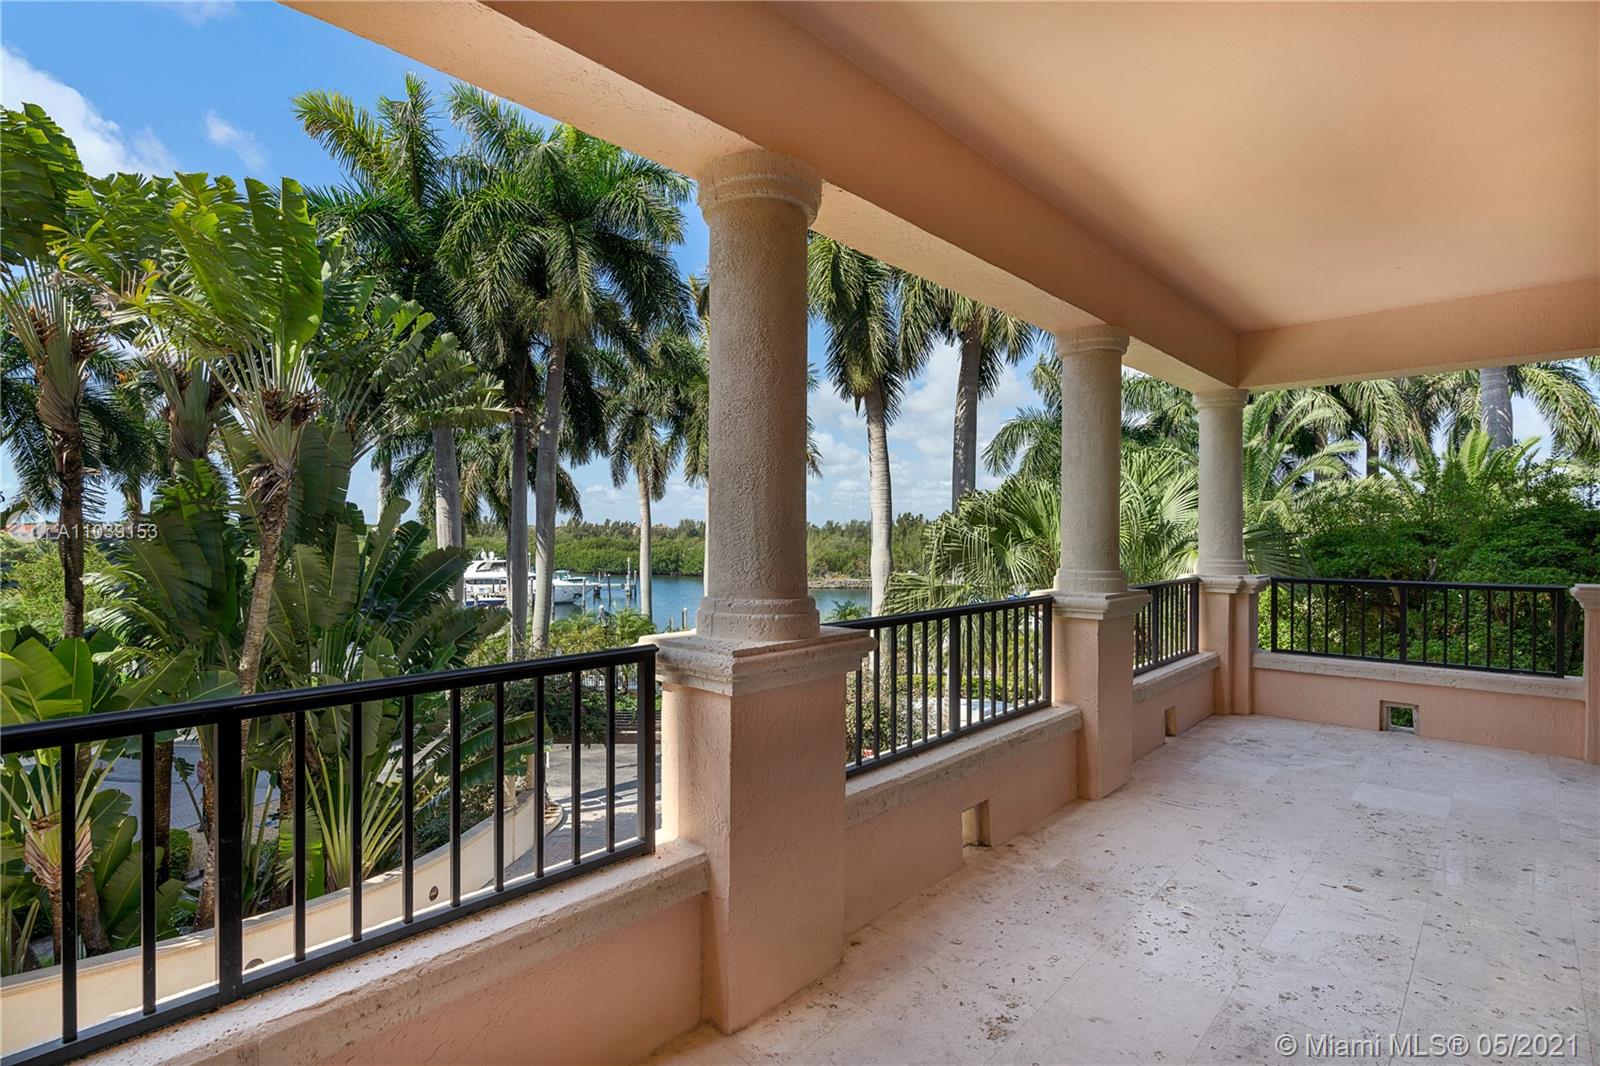 Photo 1 of Deering Bay Condo I Apt 128 in Coral Gables - MLS A11039153